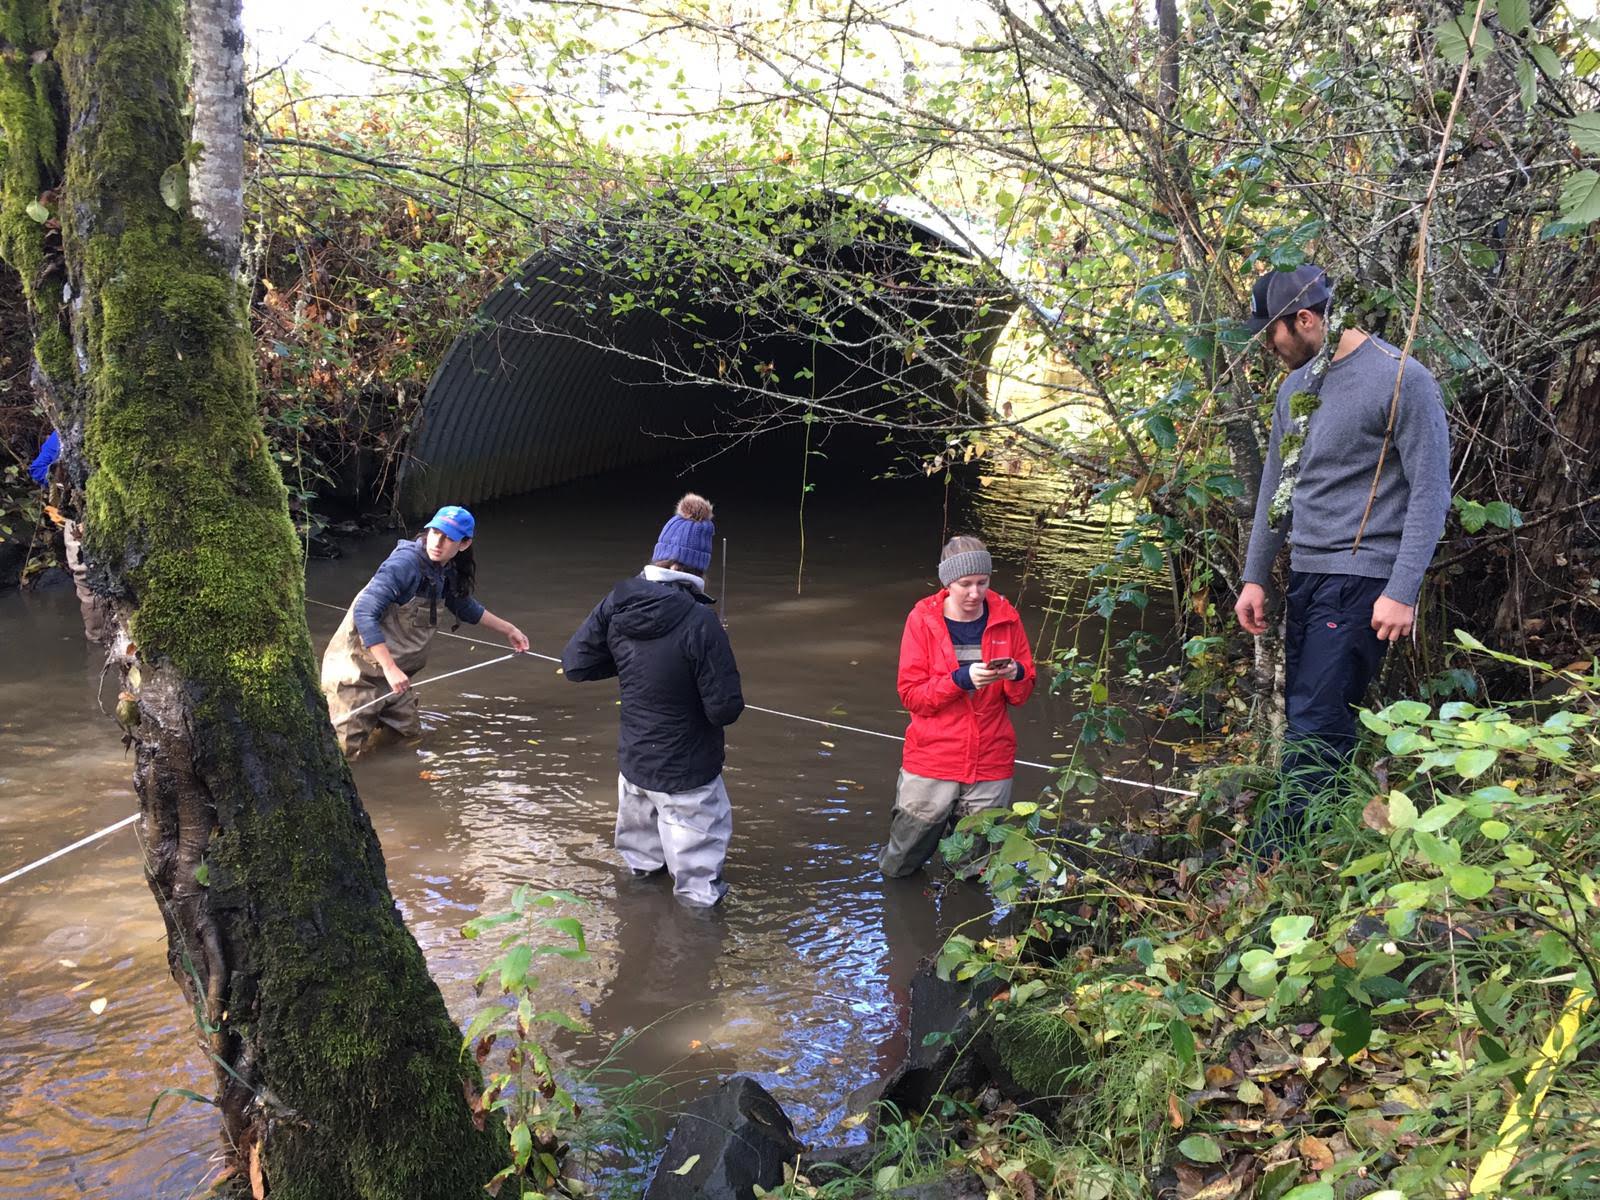 five students doing research in a river, next to a large drainpipe